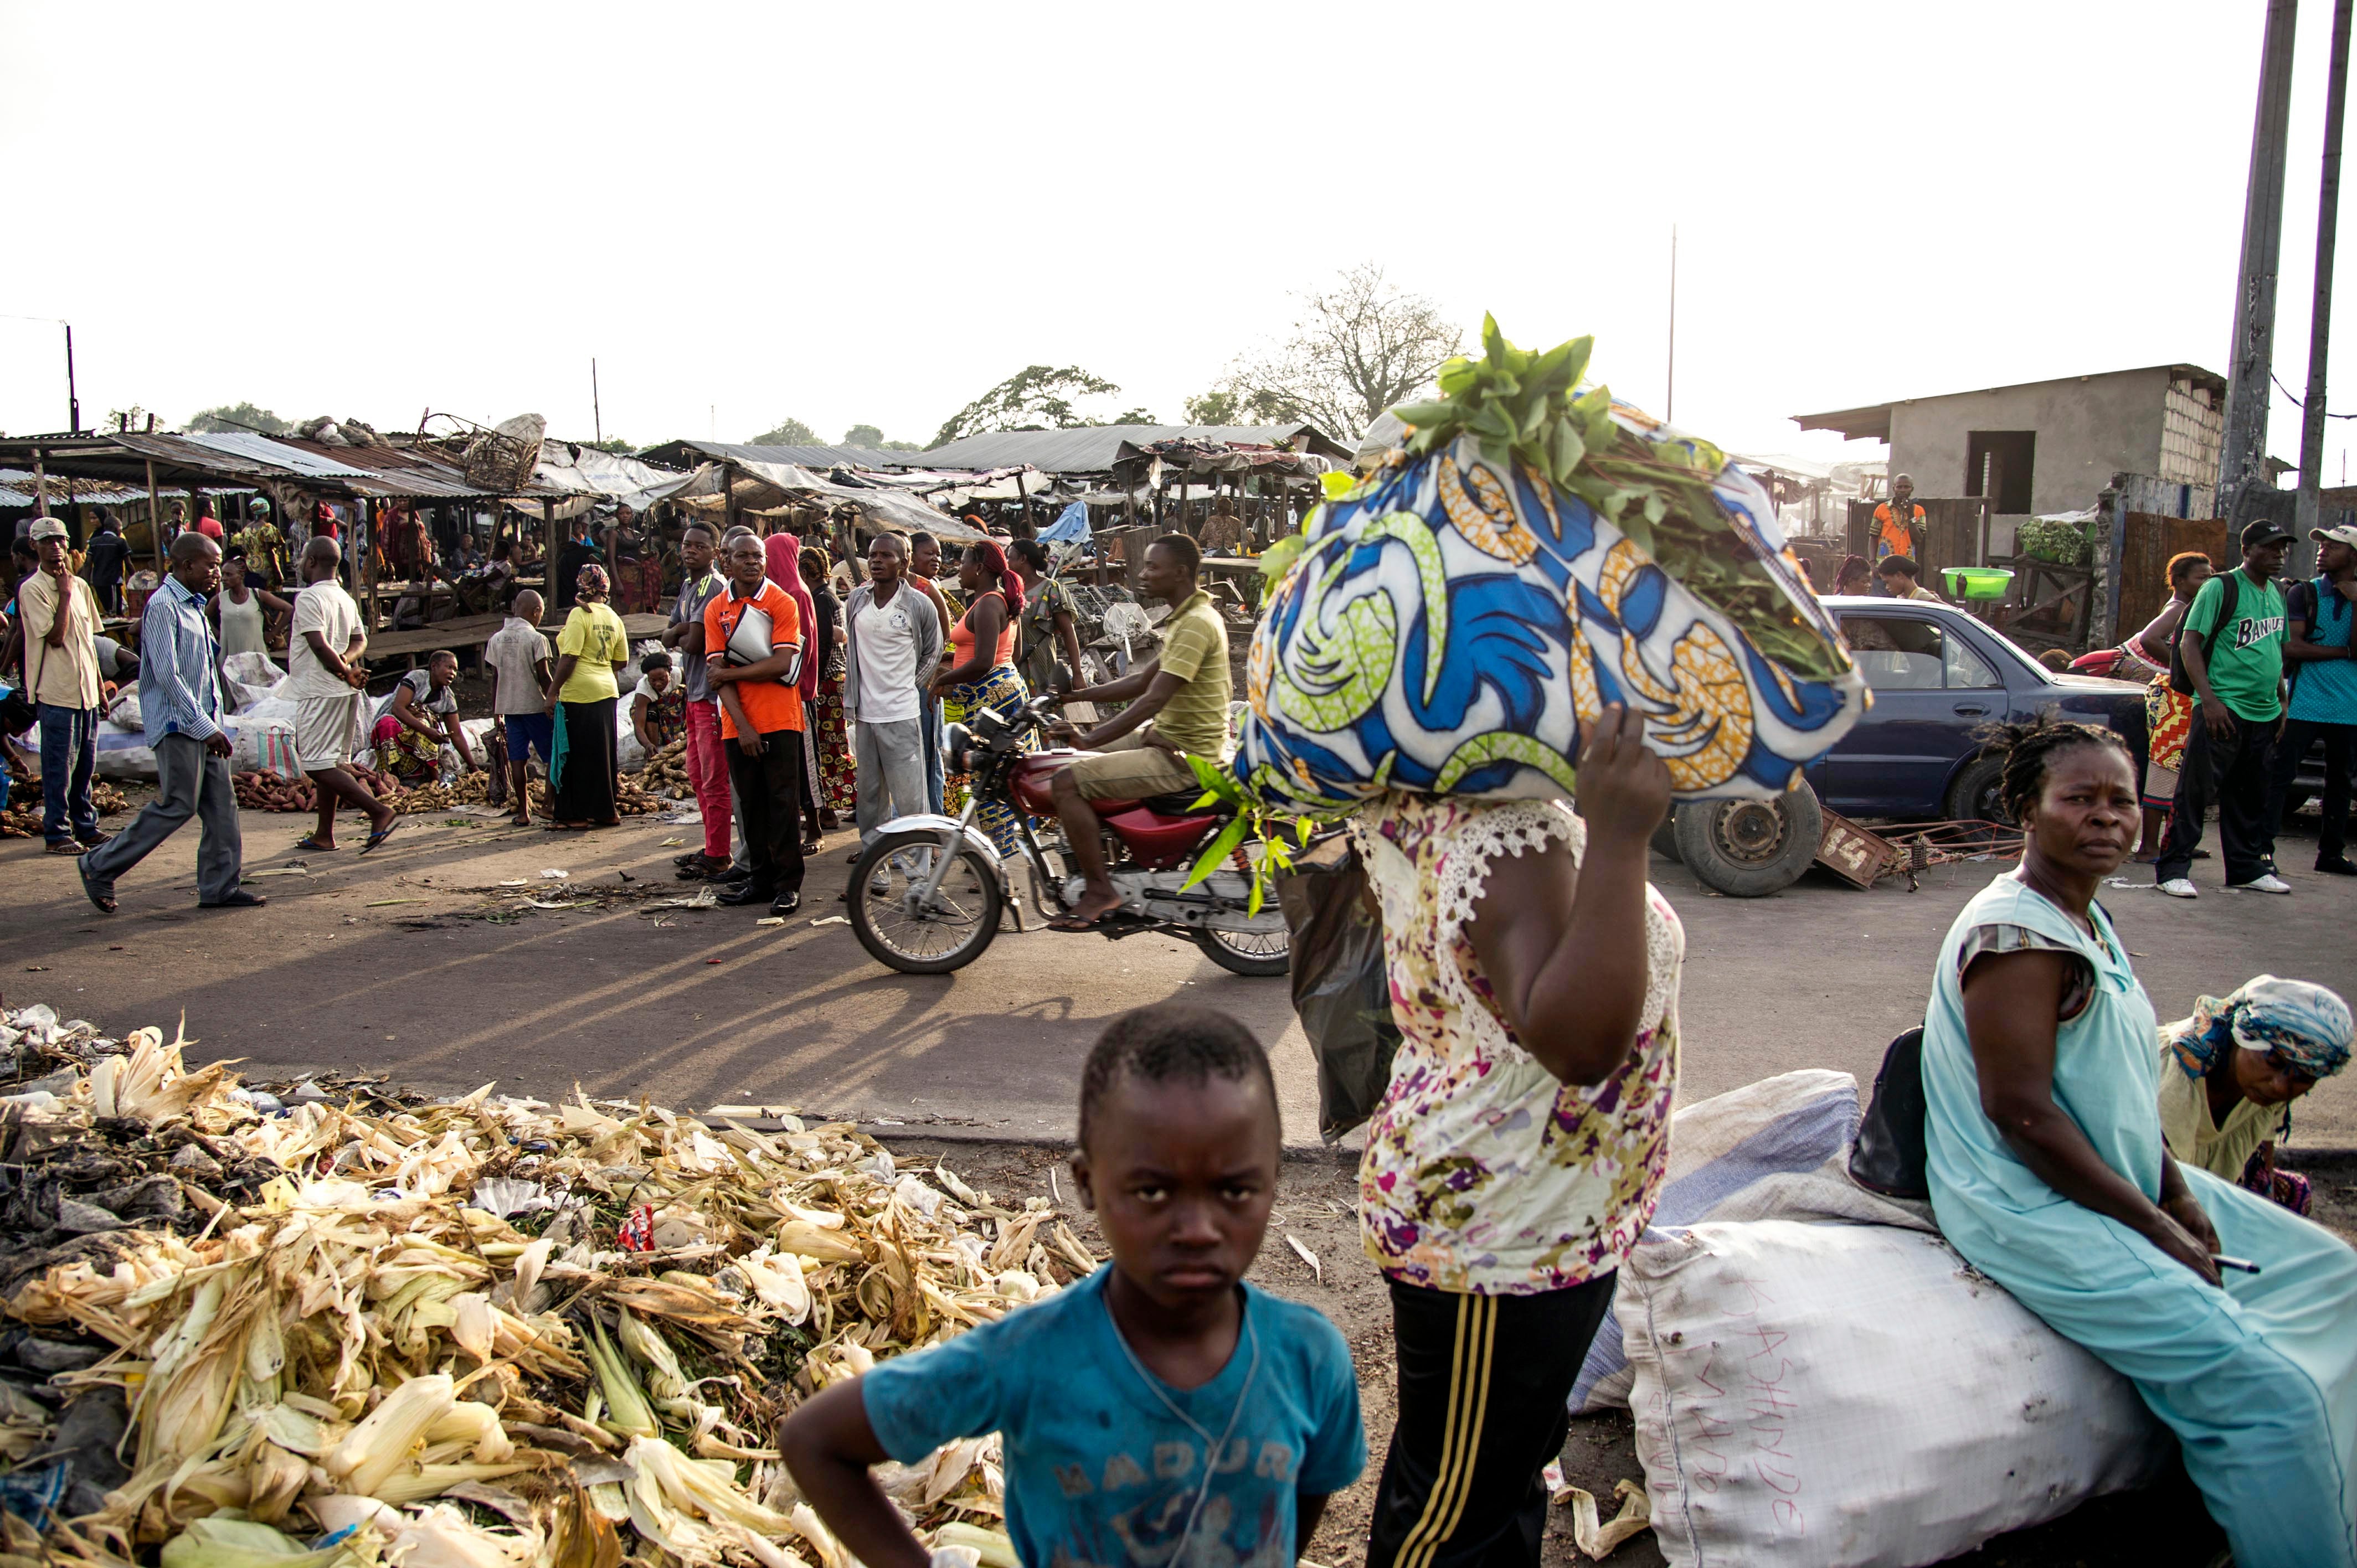 File photo: People stand at the market in Kinshasa, Democratic Republic of Congo, 3 April 2017